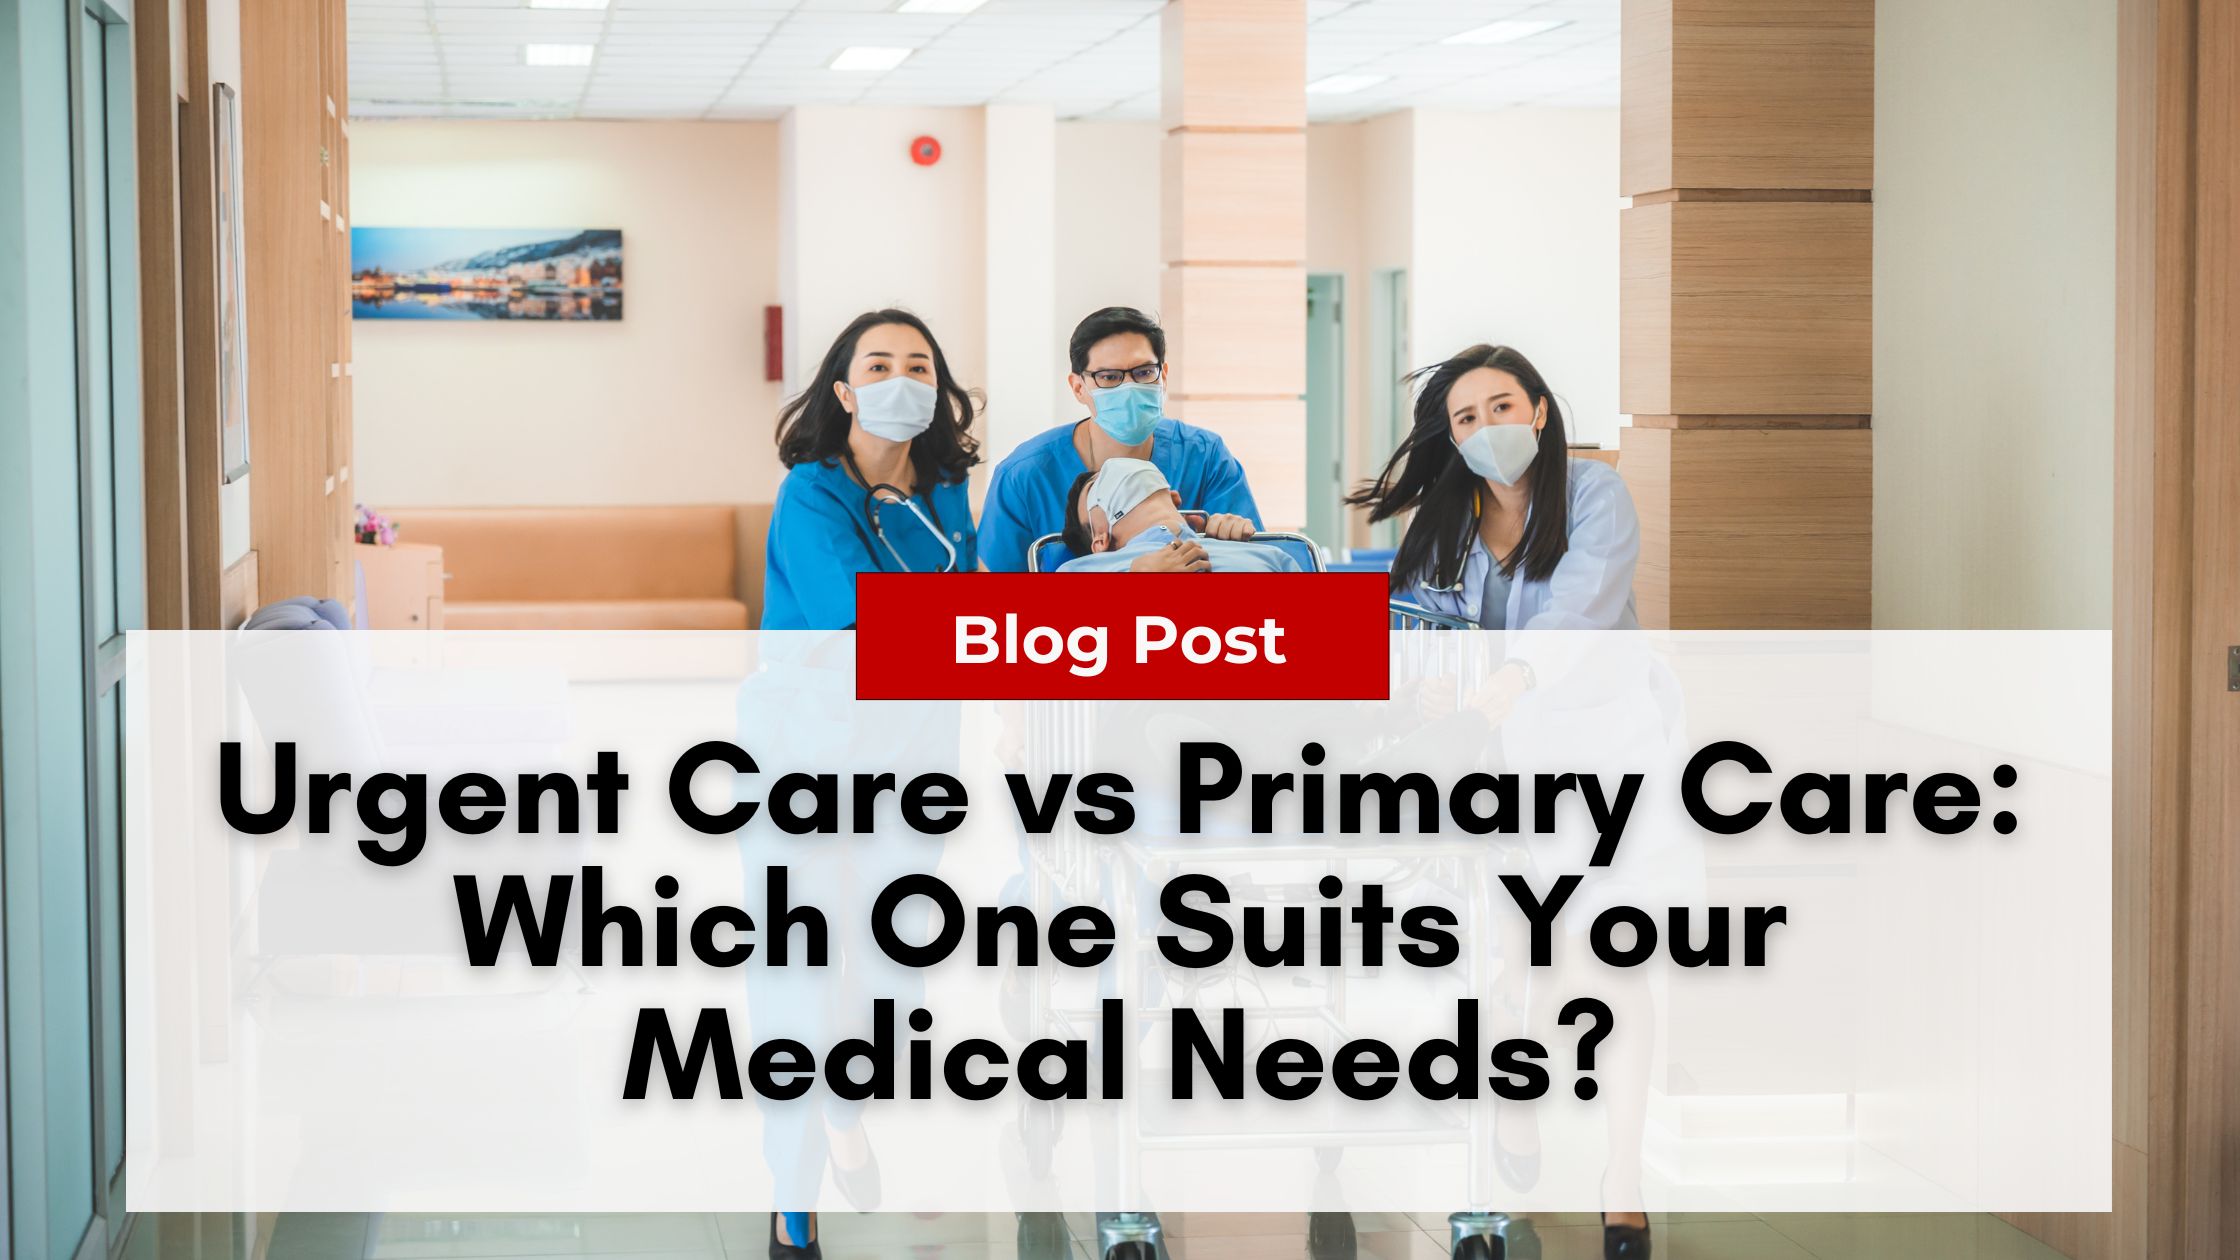 Medical professionals wearing masks assist a patient on a stretcher in a hospital hallway. Text overlay reads: "Blog Post - Urgent Care vs Primary Care: Which One Suits Your Medical Needs?" Learn how Nurse Practitioner Burnout impacts both settings.